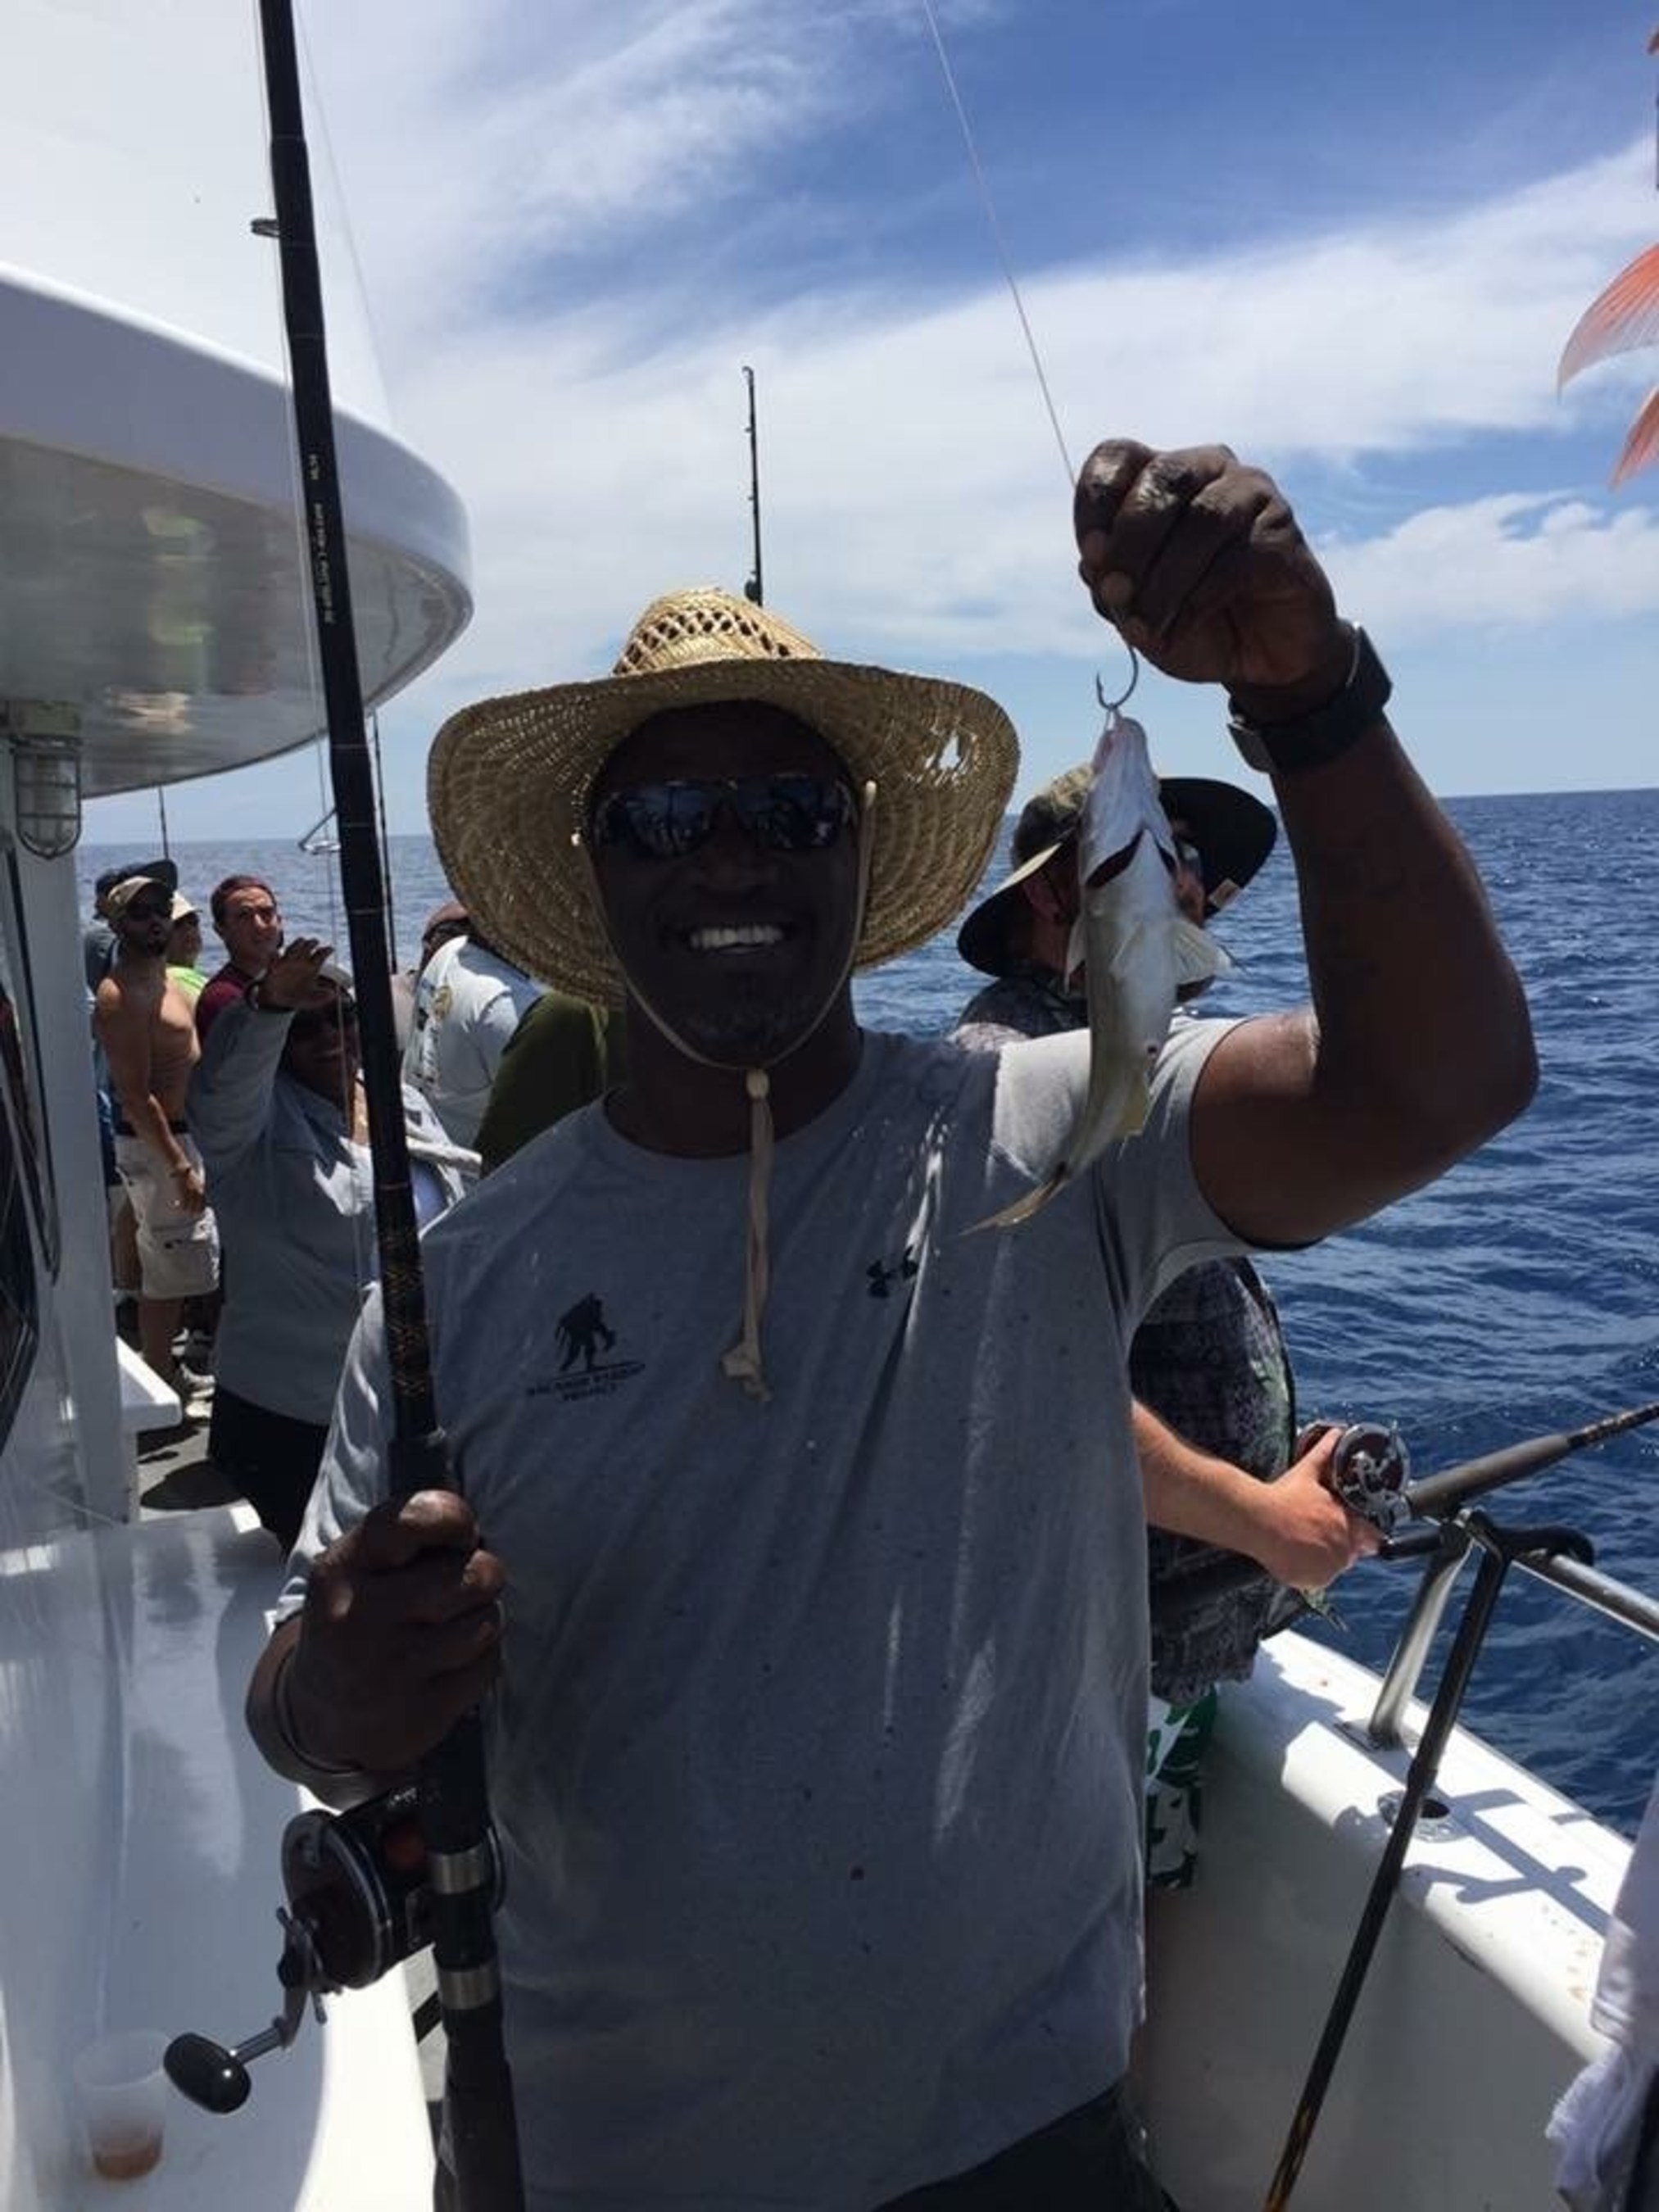 The Orlando Wounded Warrior Project(R) (WWP) Peer Support Group and The Mission Continues Orlando 1st Service Platoon teamed up for a special deep-sea fishing event at Sunrise Marina in Port Canaveral, Florida.